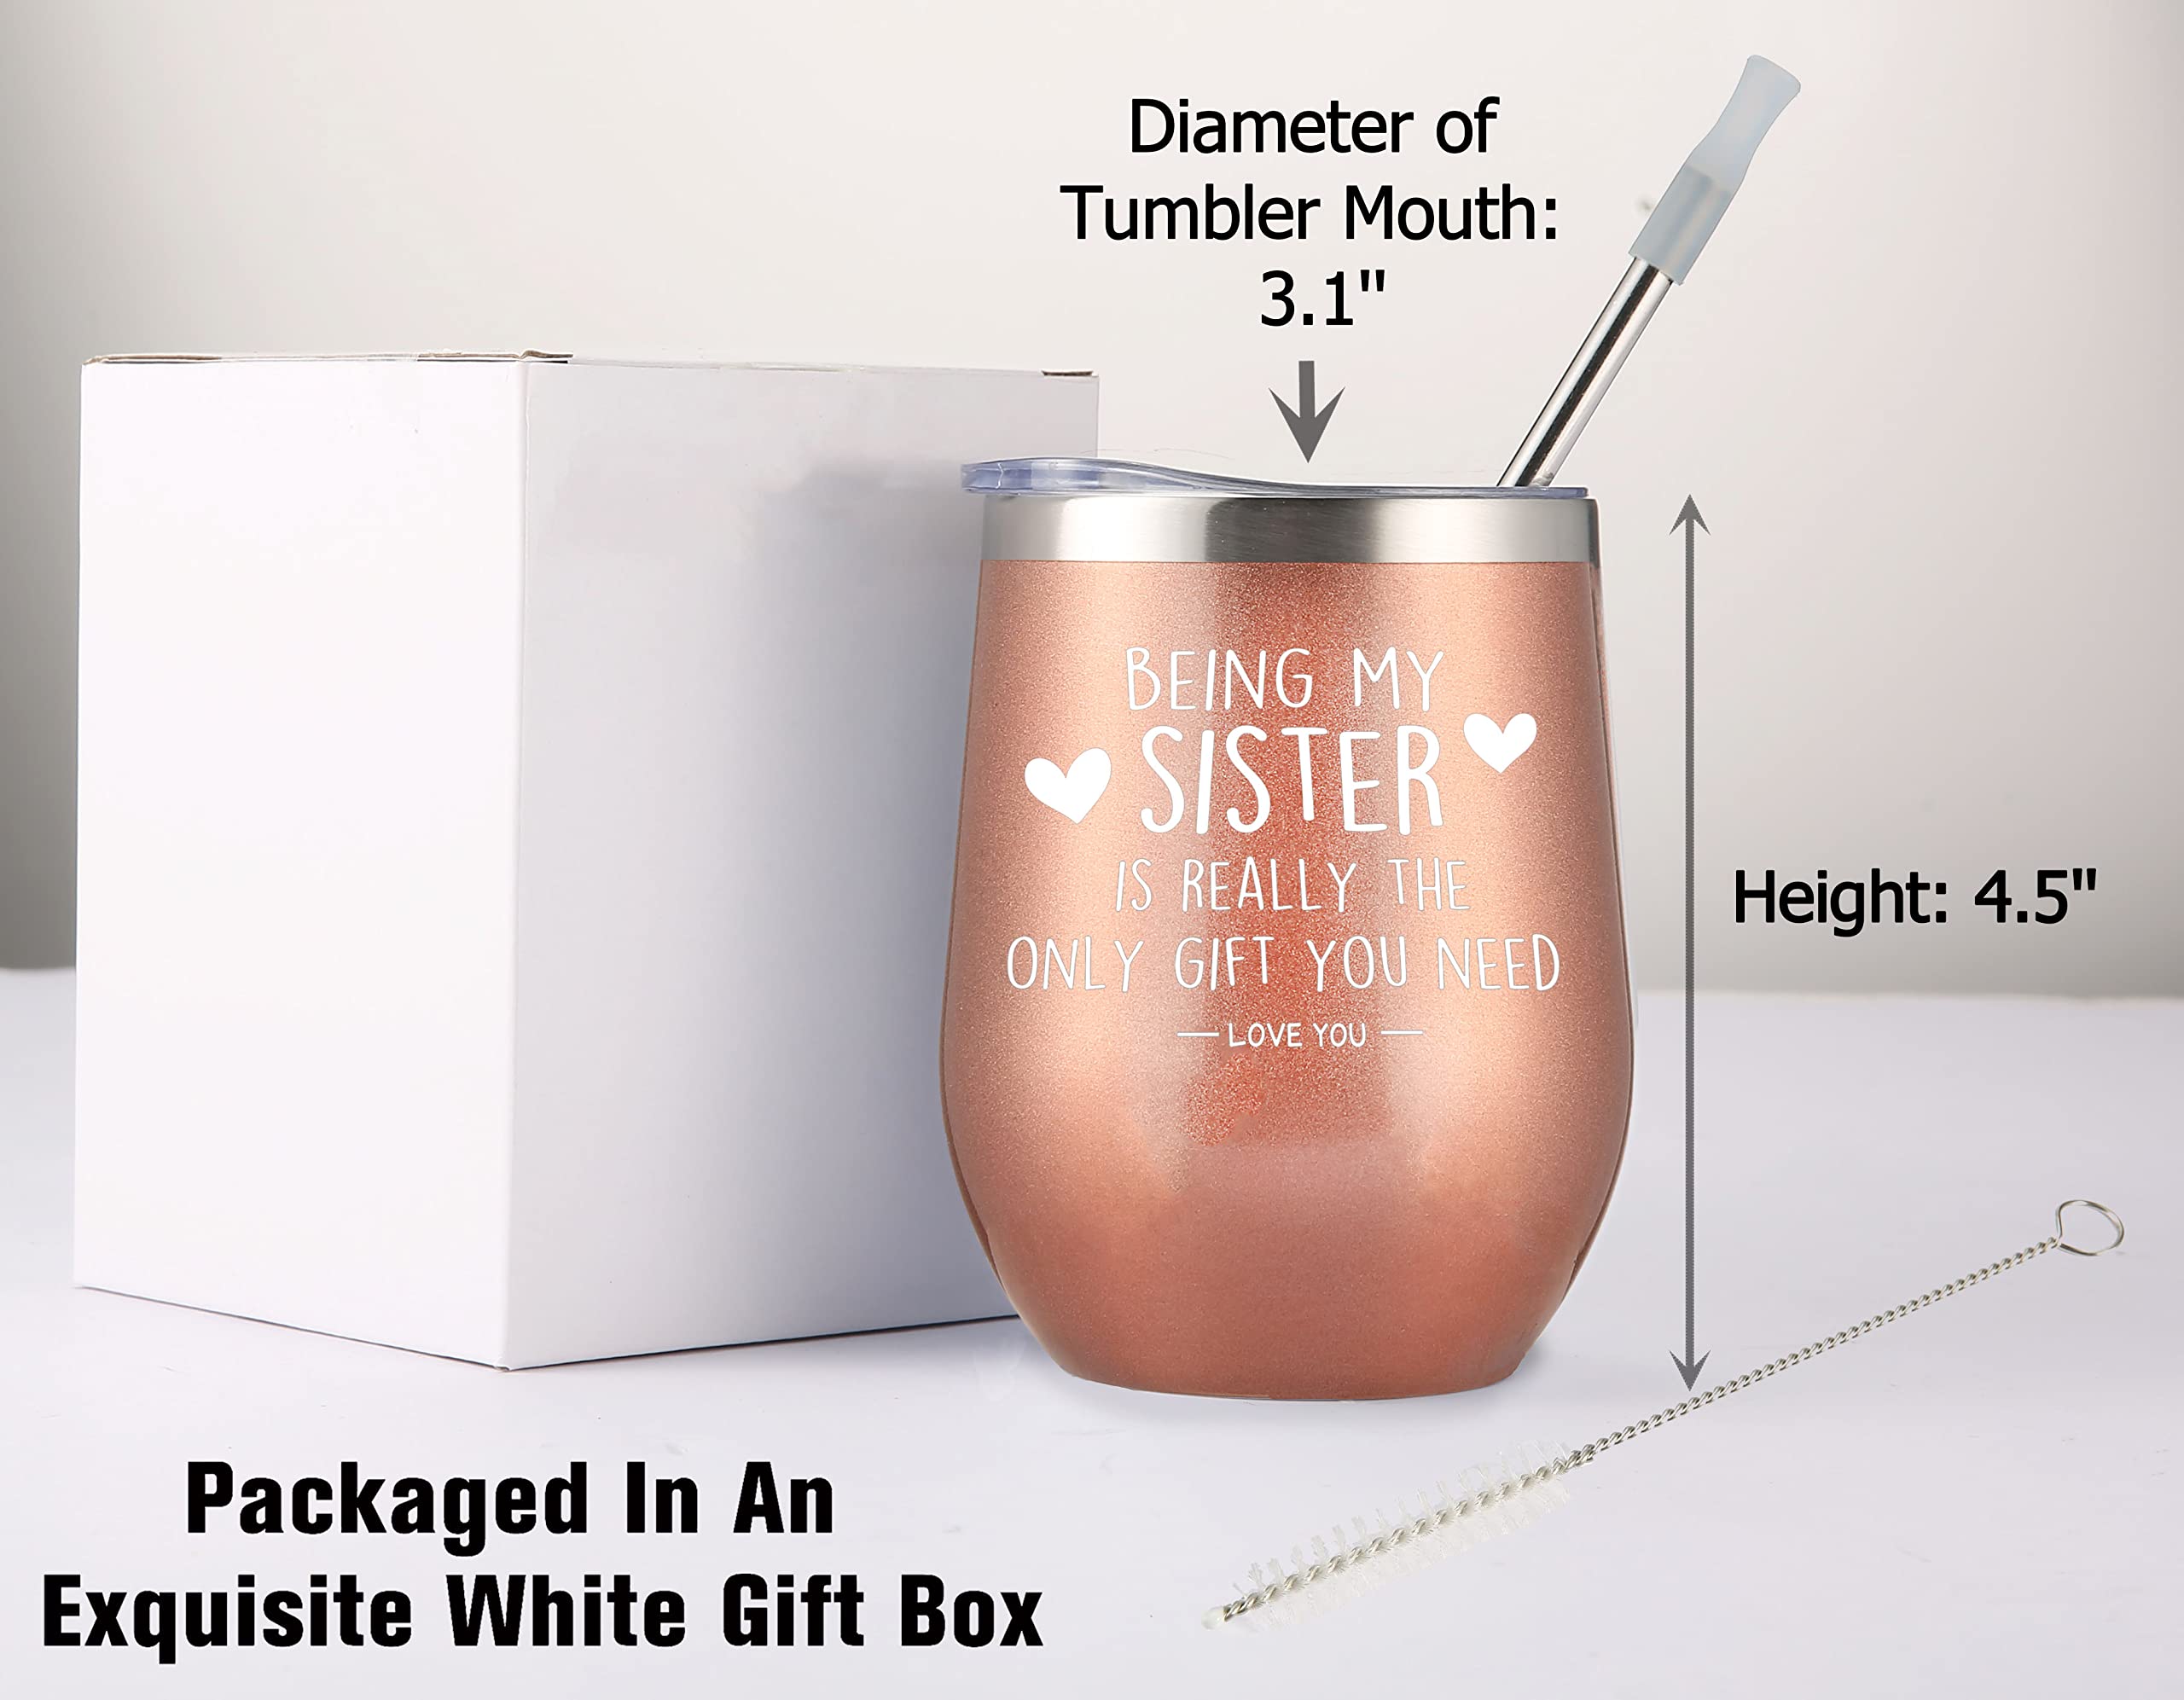 GEANHIL Being My Sister Is the Only Gift You Need-Sister Tumbler Gift-Sister in Law Tumbler Gift-Birthday Christmas Gifts for Sister from Sis Brother-12oz Rose Golden Tumbler Coffee Cup Mug